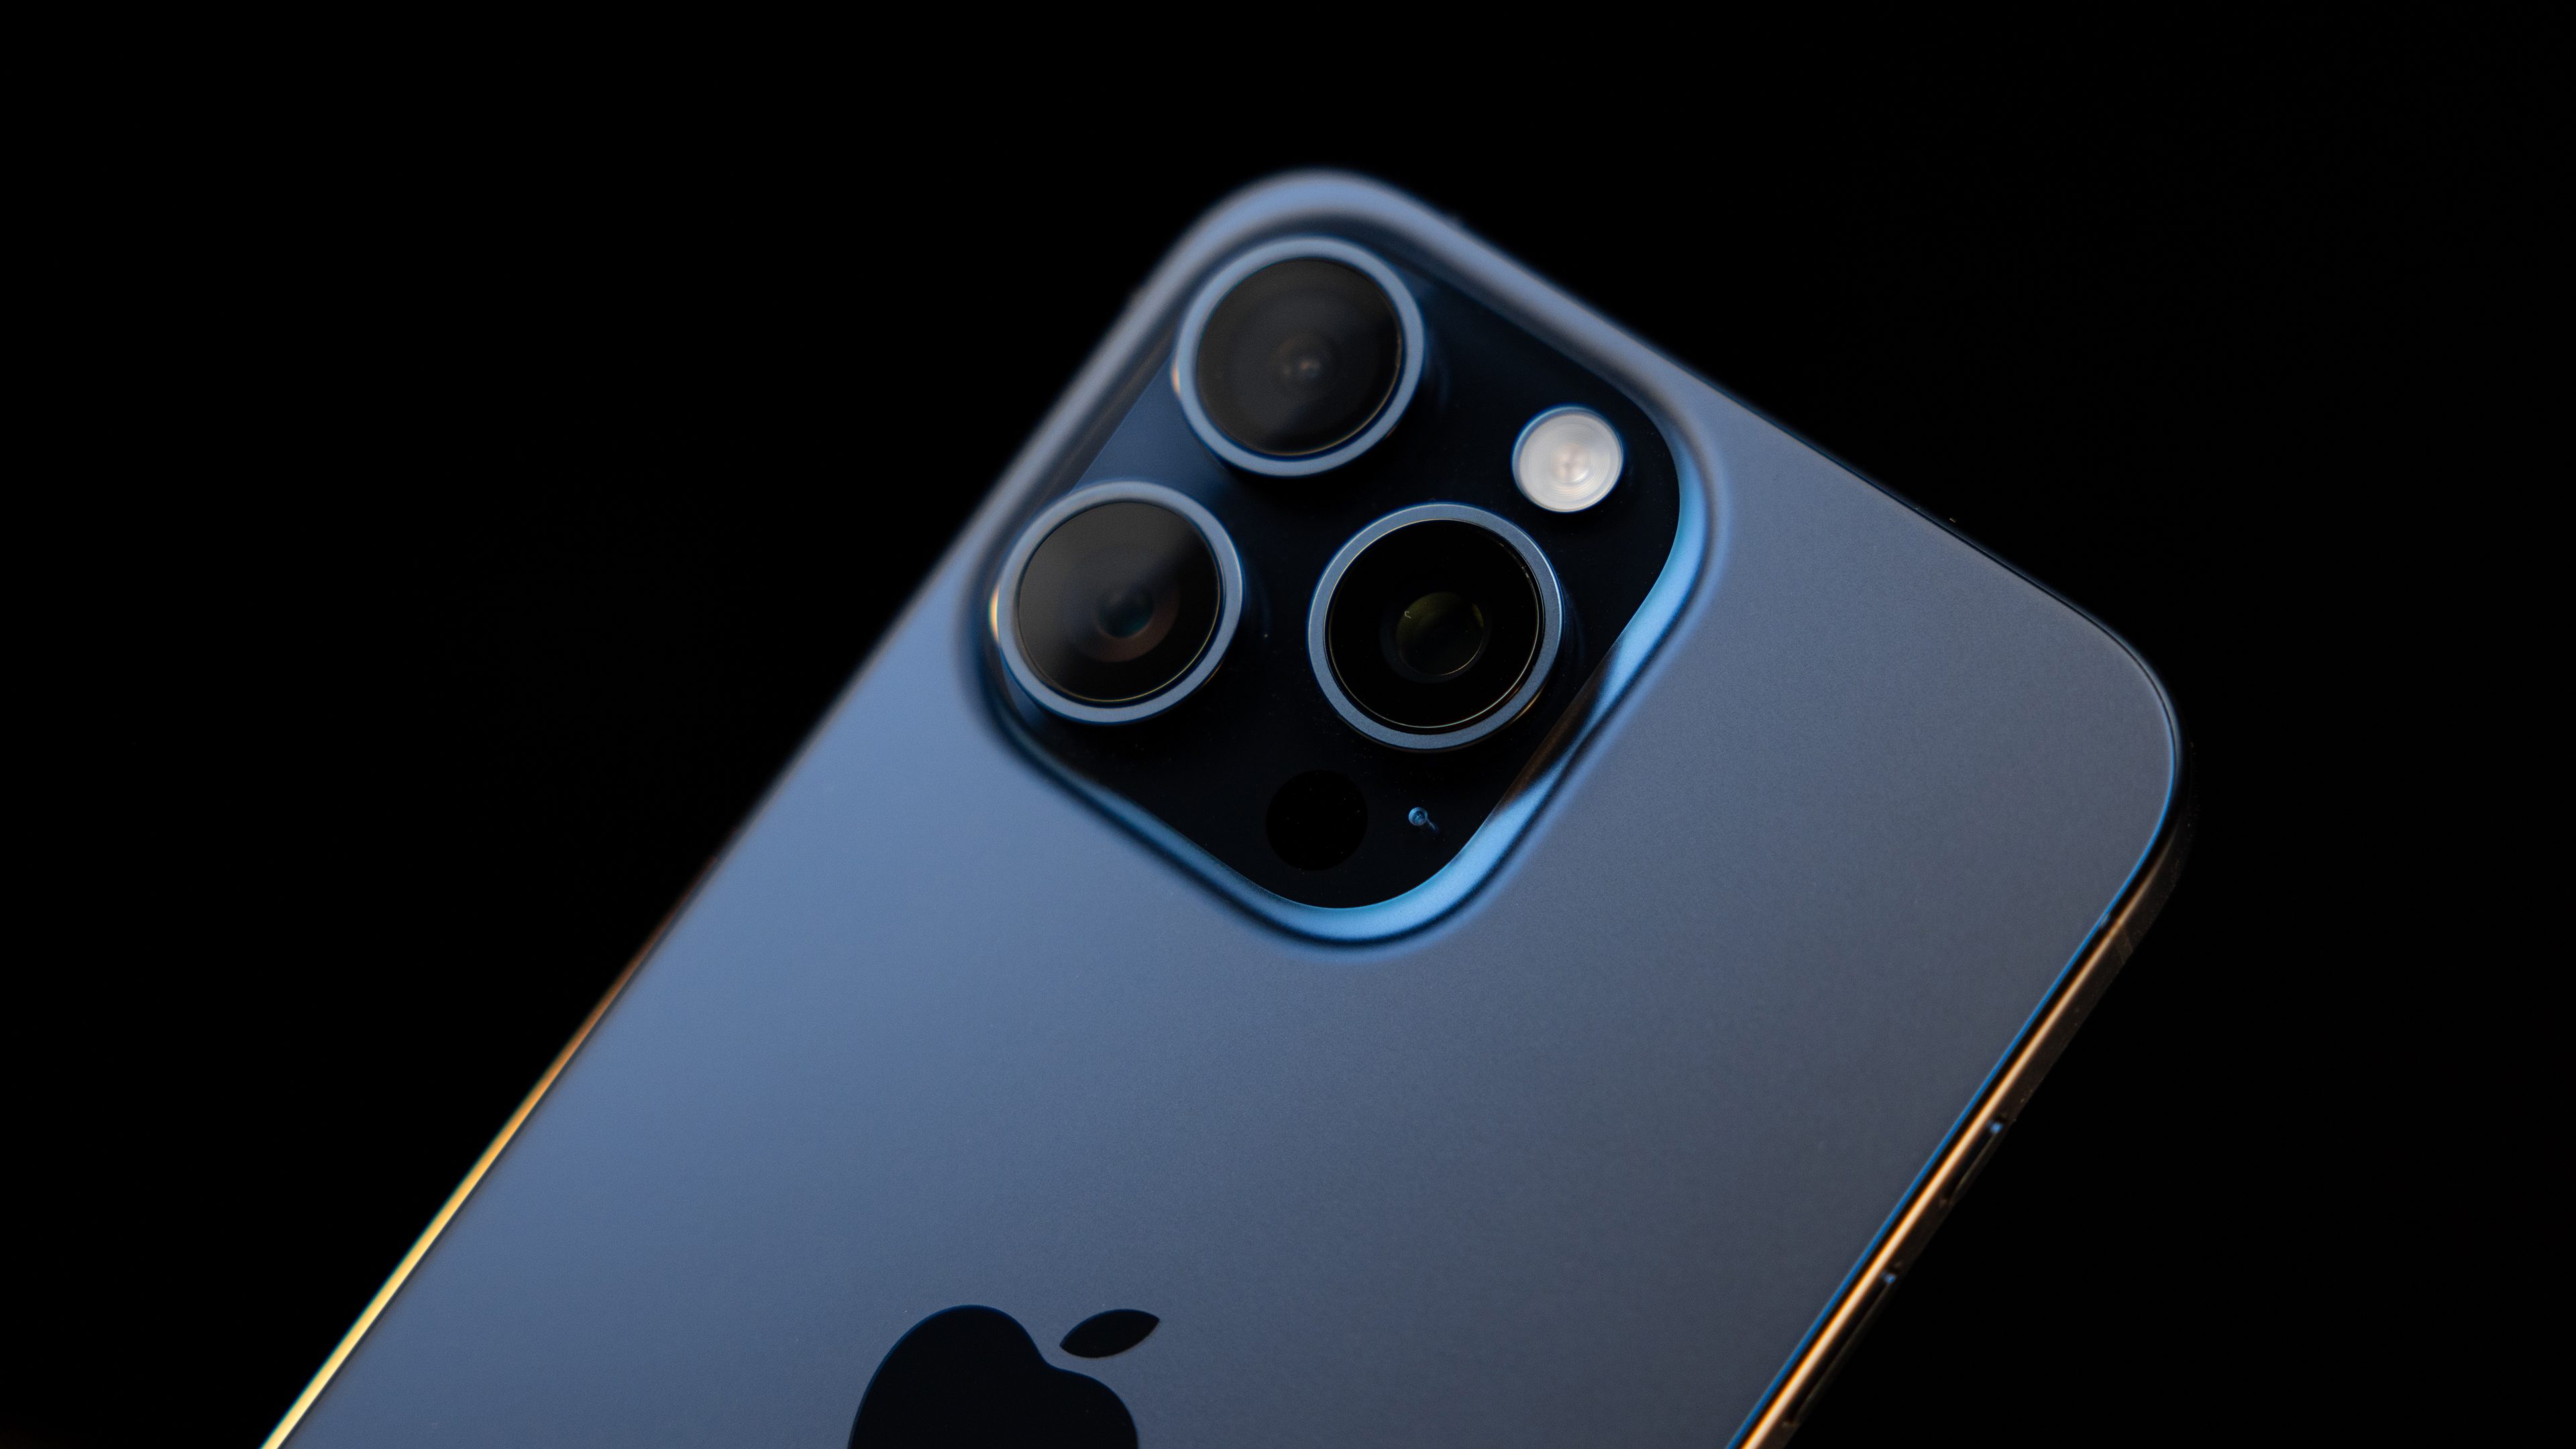 iPhone 16 Pro Said to Feature Wi-Fi 7 Support, 48MP Ultra Wide